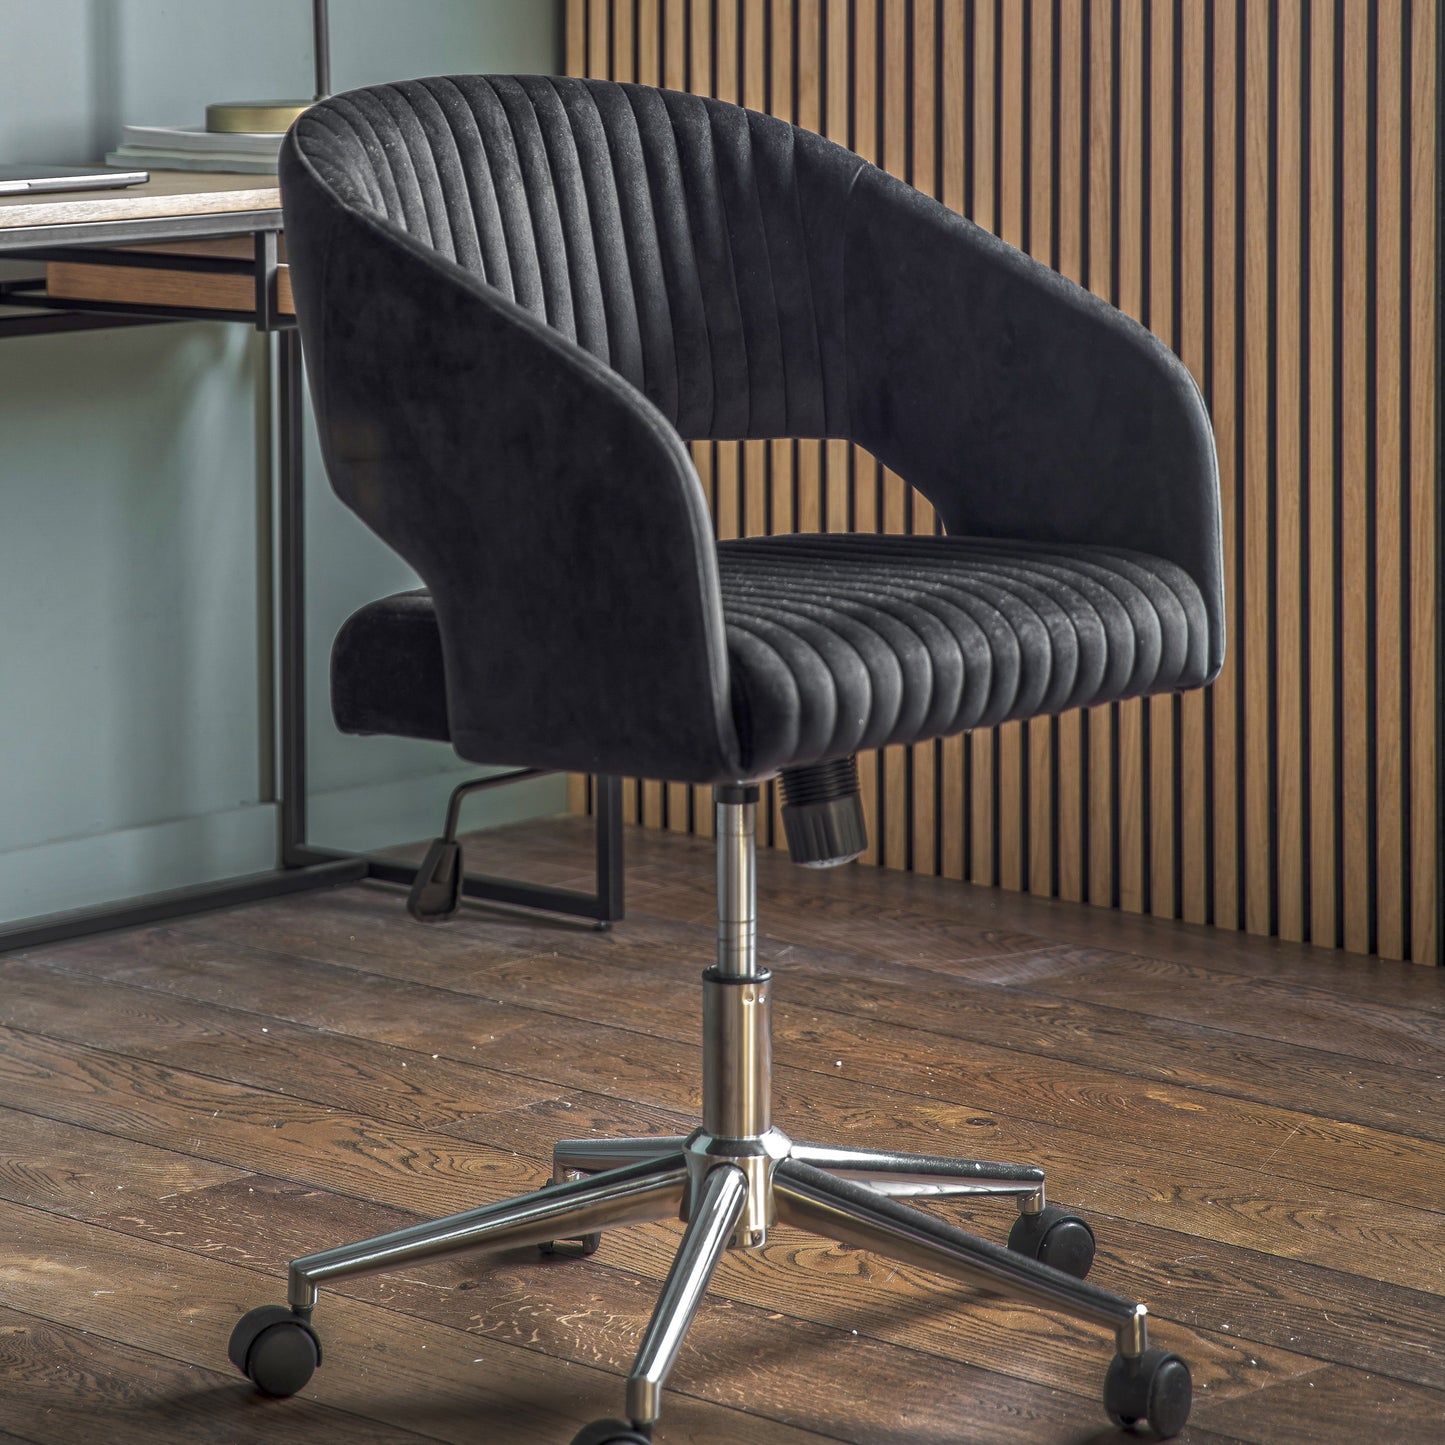 A black velvet swivel chair on casters from Kikiathome.co.uk, perfect for interior decor.